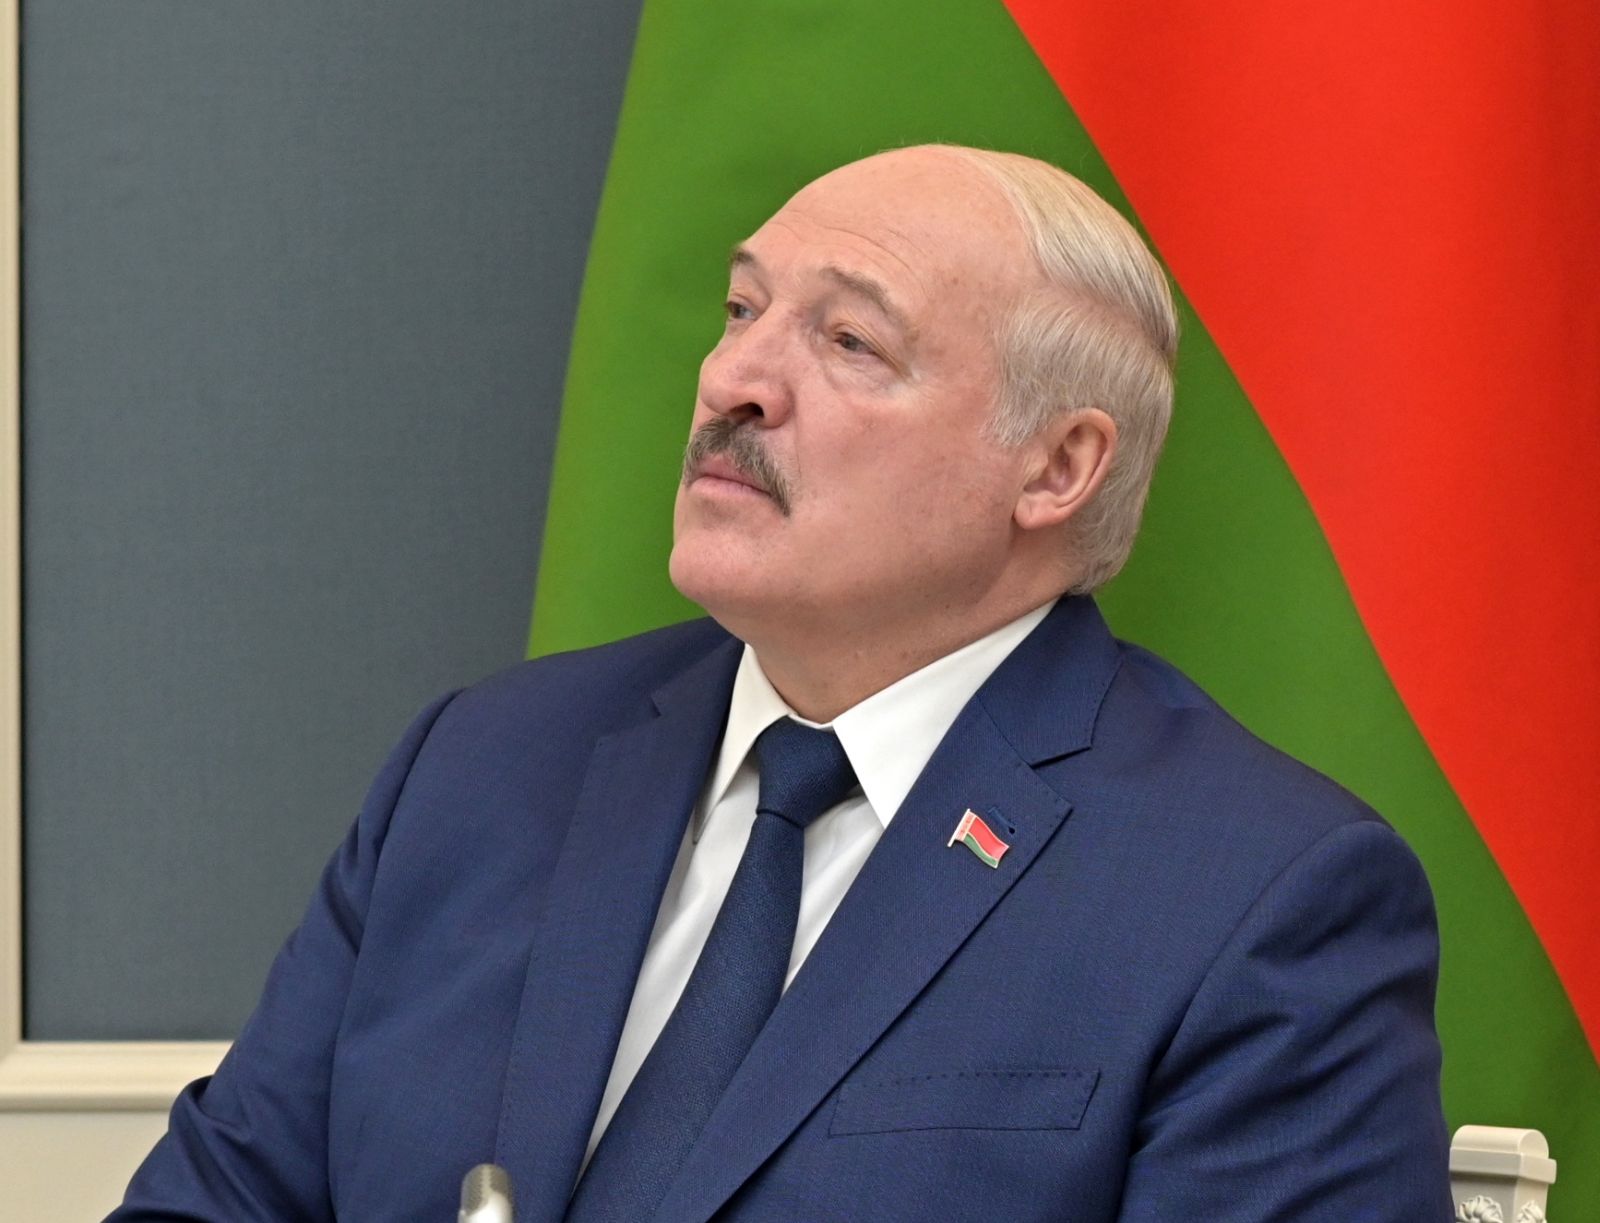 epa09771338 Belarusian President Alexander Lukashenko looks at the screen as the Russian President starts the exercises of the Russian strategic deterrence forces with launches of the ballistic missiles from the situation center in the Moscow Kremlin in Moscow, Russia, 19 February 2022. The joint exercises of the military forces 'Union Courage-2022' of Russia and Belarus are held from February 10 to 20. As specified in the Russian Ministry of Defense, the purpose of these exercises is to work out the tasks of 'stopping and repelling external aggression' during a defensive operation, as well as 'countering terrorism and protecting the interests of the Union State'. In Belarus, the holding of joint exercises was called a response to the 'continuing militarization' of European countries. President of Belarus Alexander Lukashenko allowed the recognition of the independence of the self-proclaimed Donetsk and Luhansk People's Republics (DPR and LPR) by Minsk.  EPA/ALEKSEY NIKOLSKYI/ SPUTNIK/ KREMLIN POOL